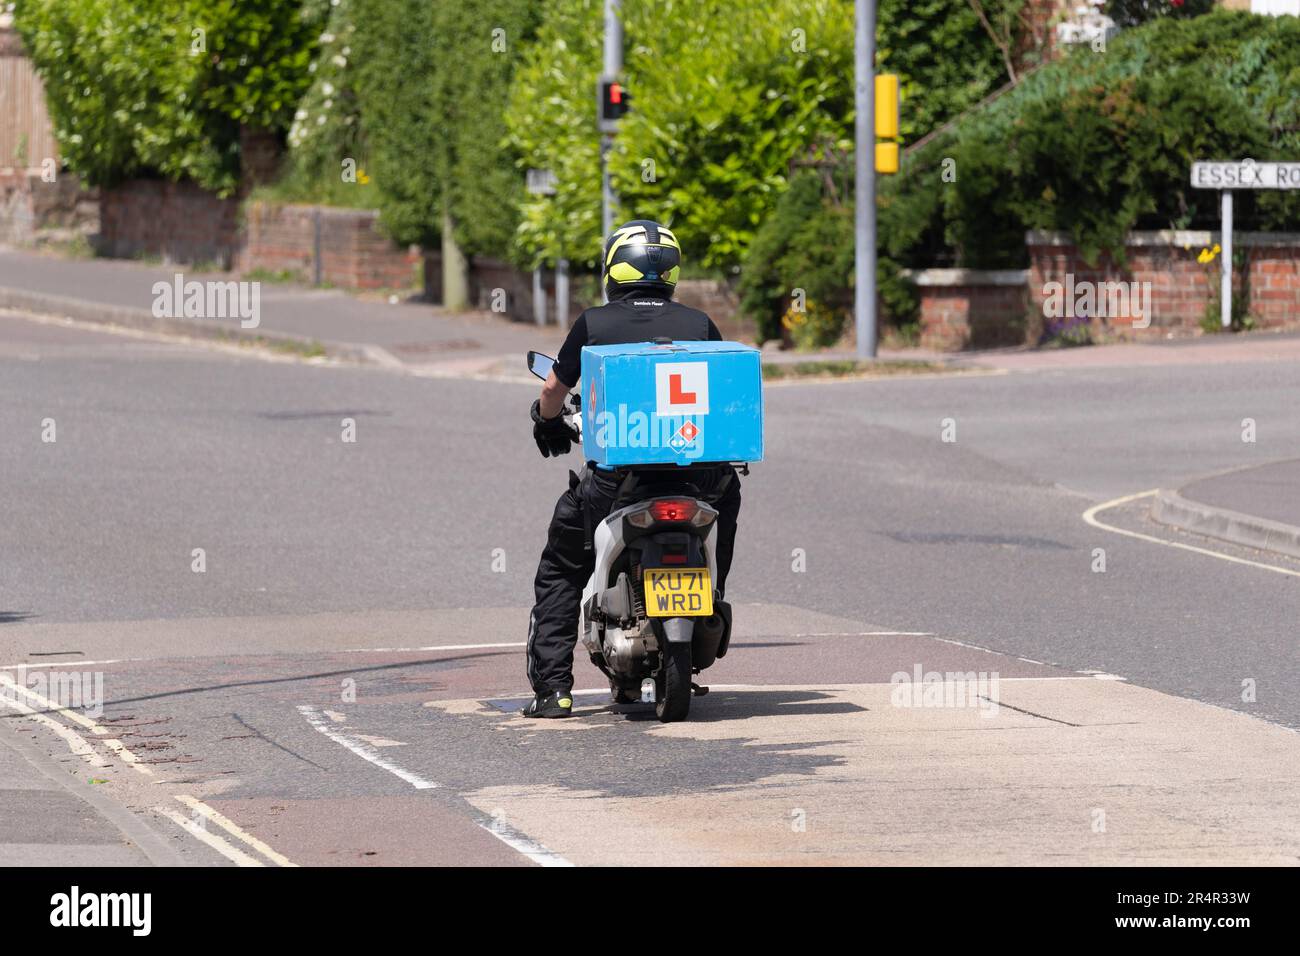 A moped rider with an L Plate delivering pizza for Dominos Pizza, Basingstoke, UK. Concept: fast food delivery, gig economy, trainee employee Stock Photo